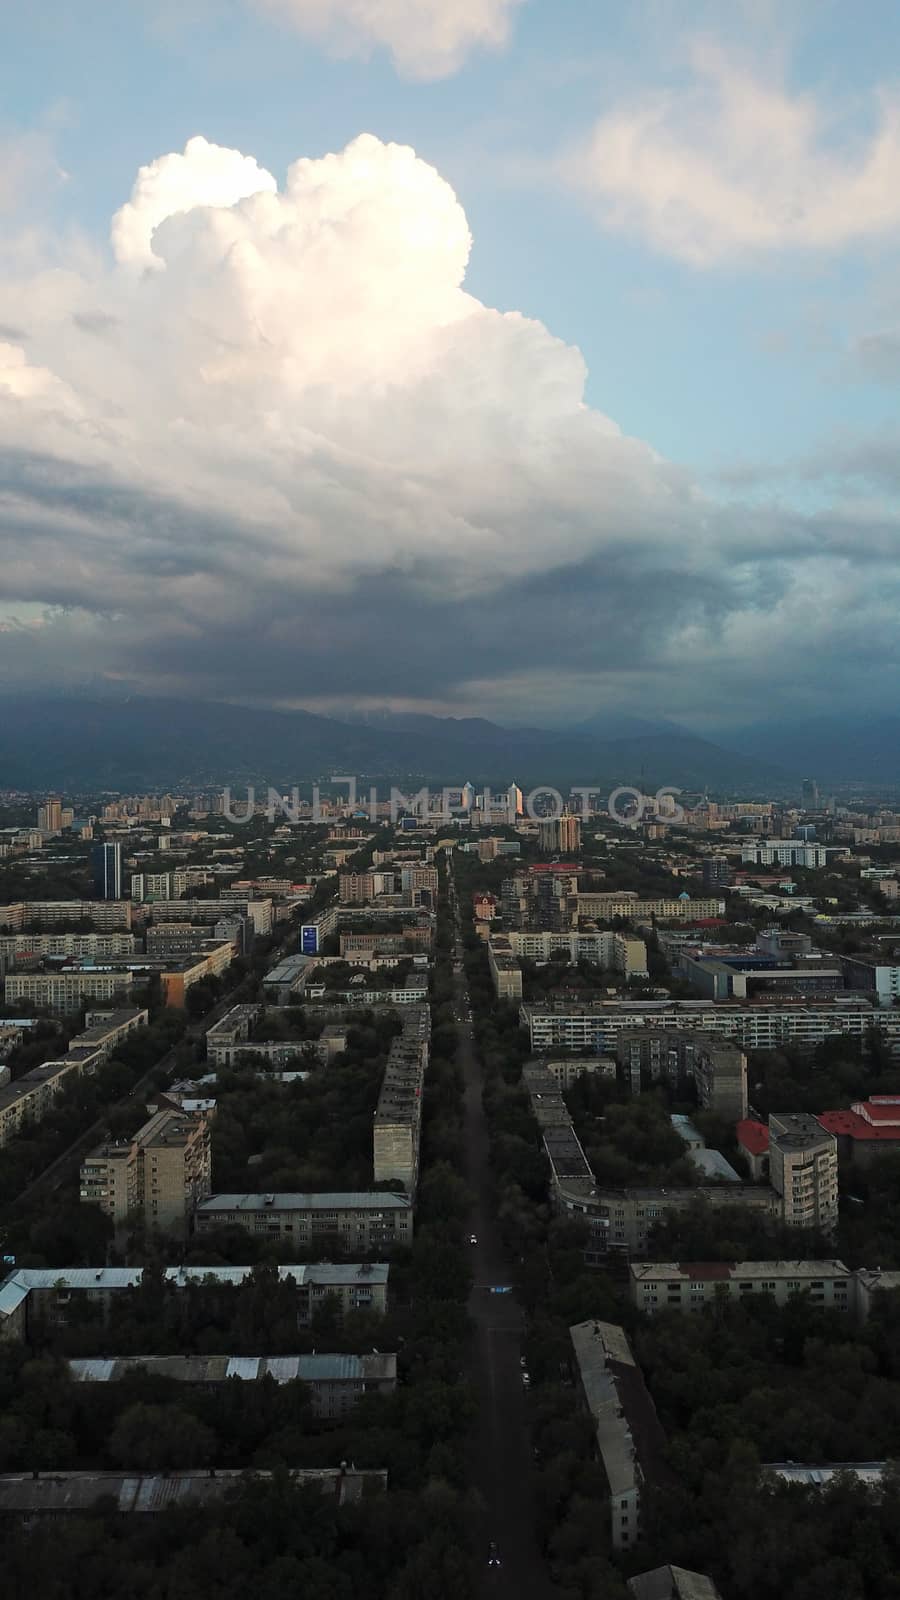 Huge clouds over the city of Almaty. Clouds hang near the mountains. Sunset. You can see different buildings, mosques, churches, and parks. Everything is illuminated by the red rays of the sun.